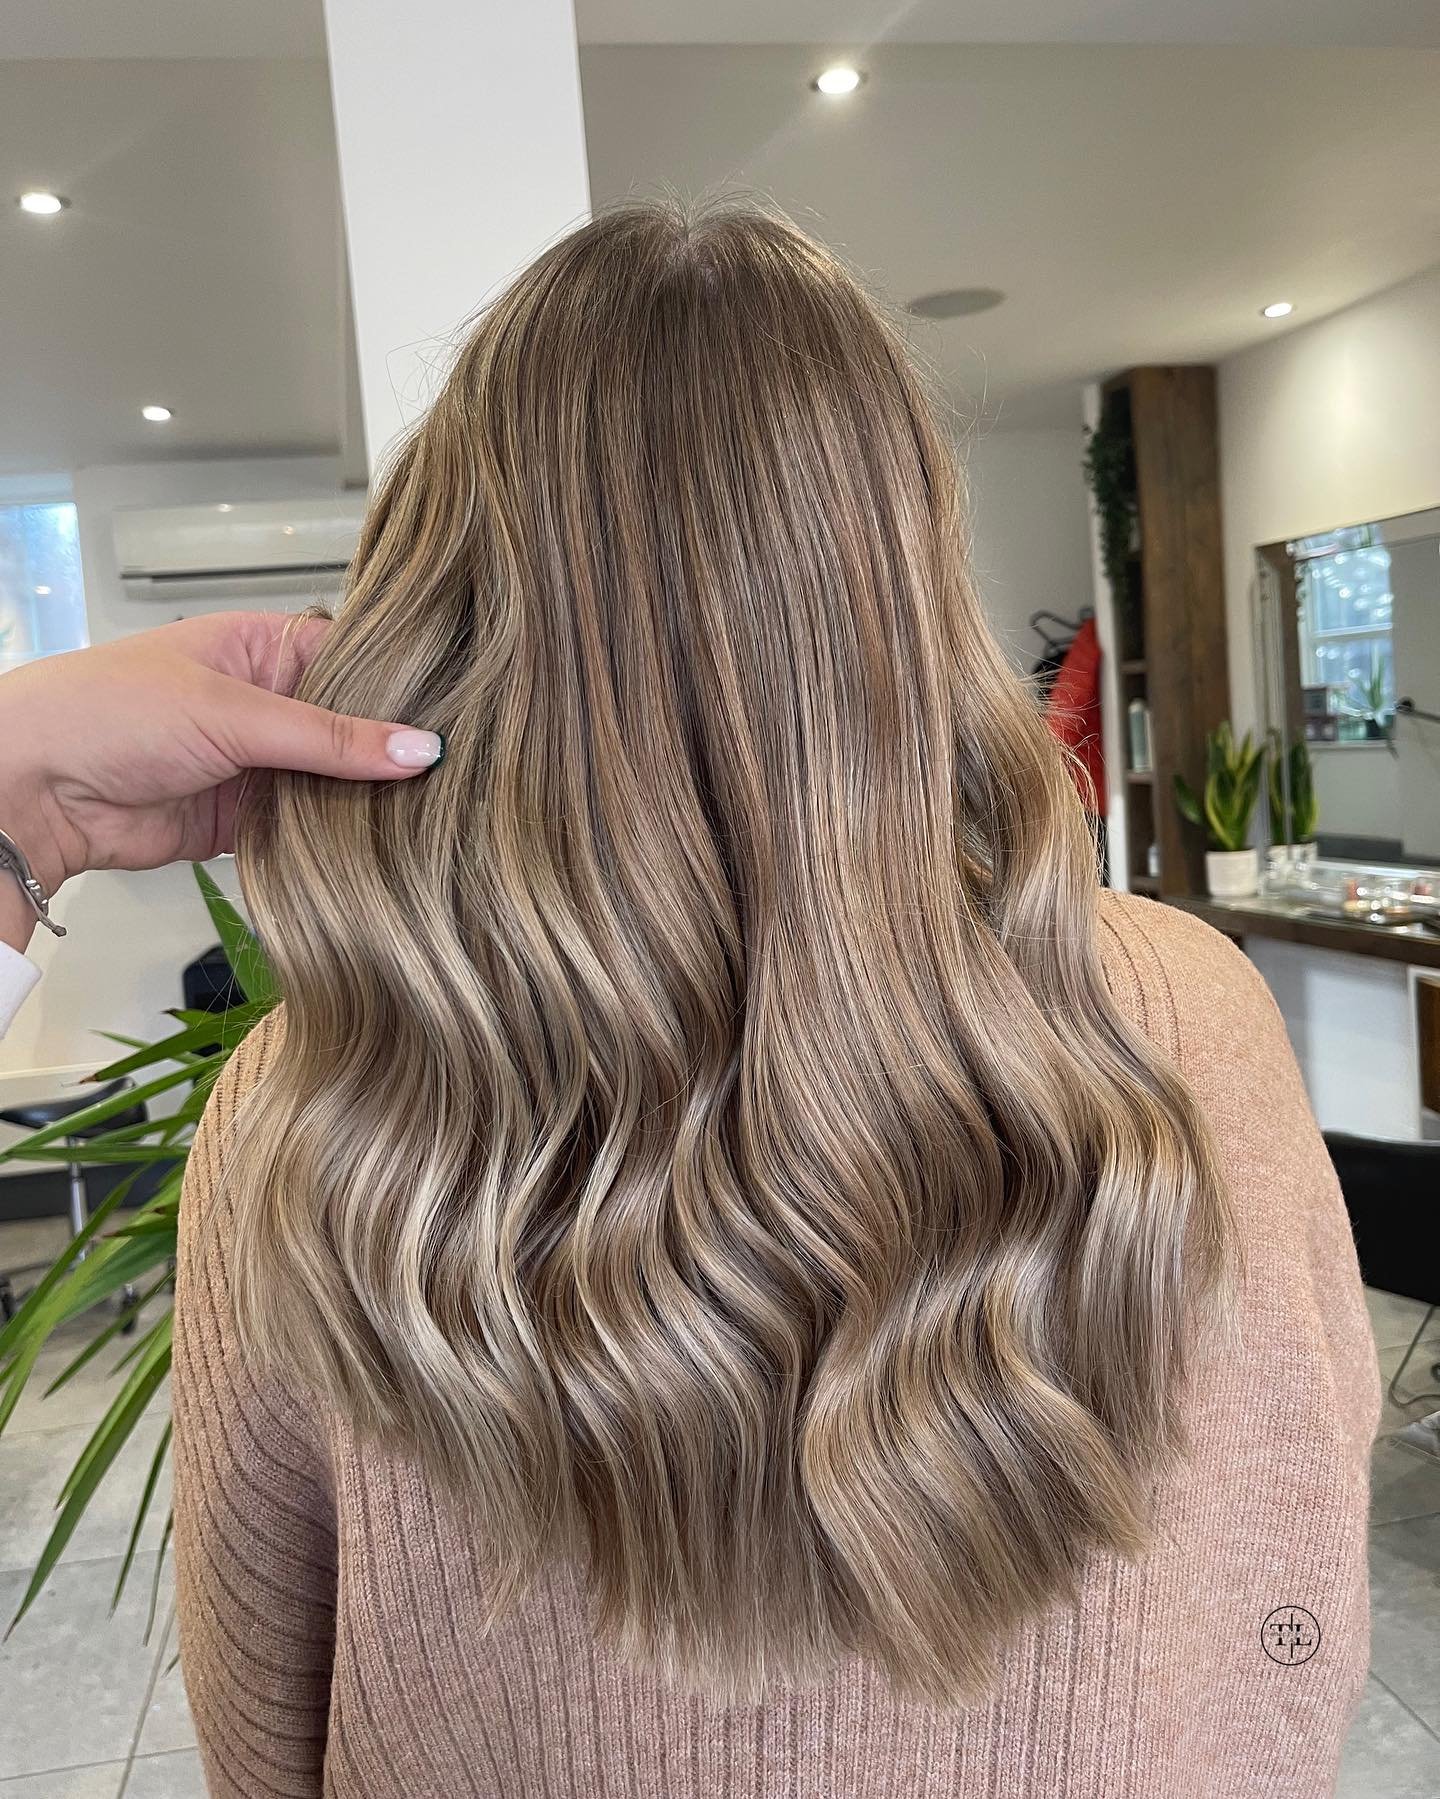 When you can&rsquo;t decide between blonde and brown, have both 💁&zwj;♀️

Stylist - @hannahmaehair 
Using - @schwarzkopfpro #blondme &amp; #igoravibrance 
Styled with @authenticbeautyconcept &amp; @ghdhair